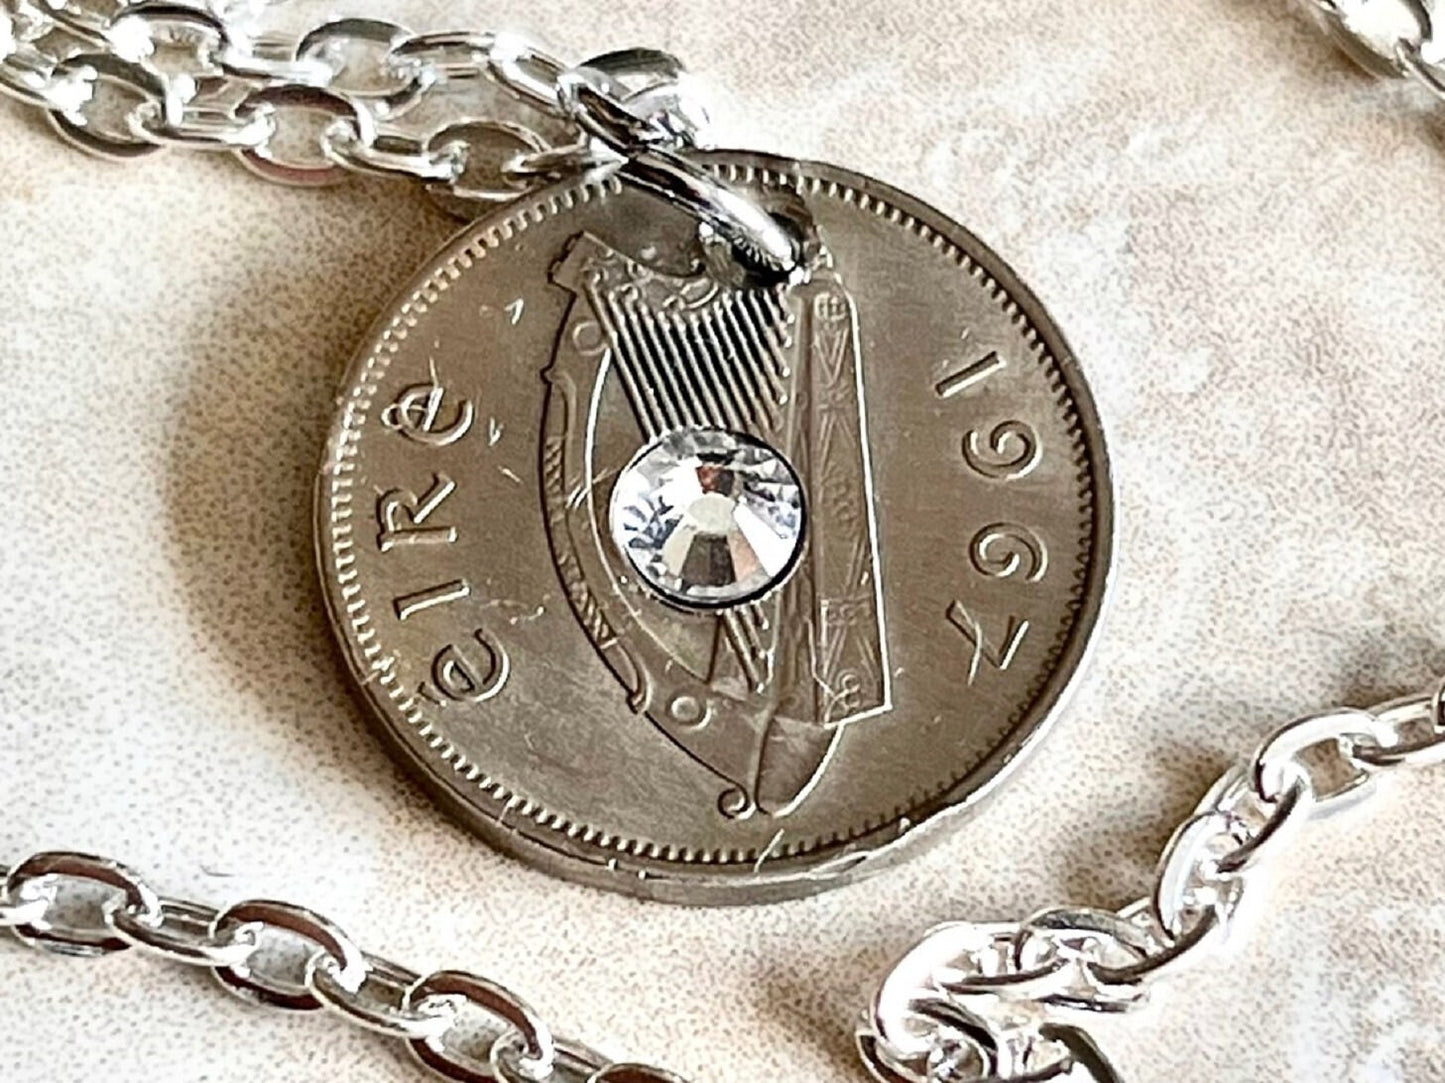 Ireland Coin Pendant 6 Pence Irish Harp Coin Necklace Rhinestone Gift For Friend Coin Charm Gift For Him, Her, Coin Collector, World Coins